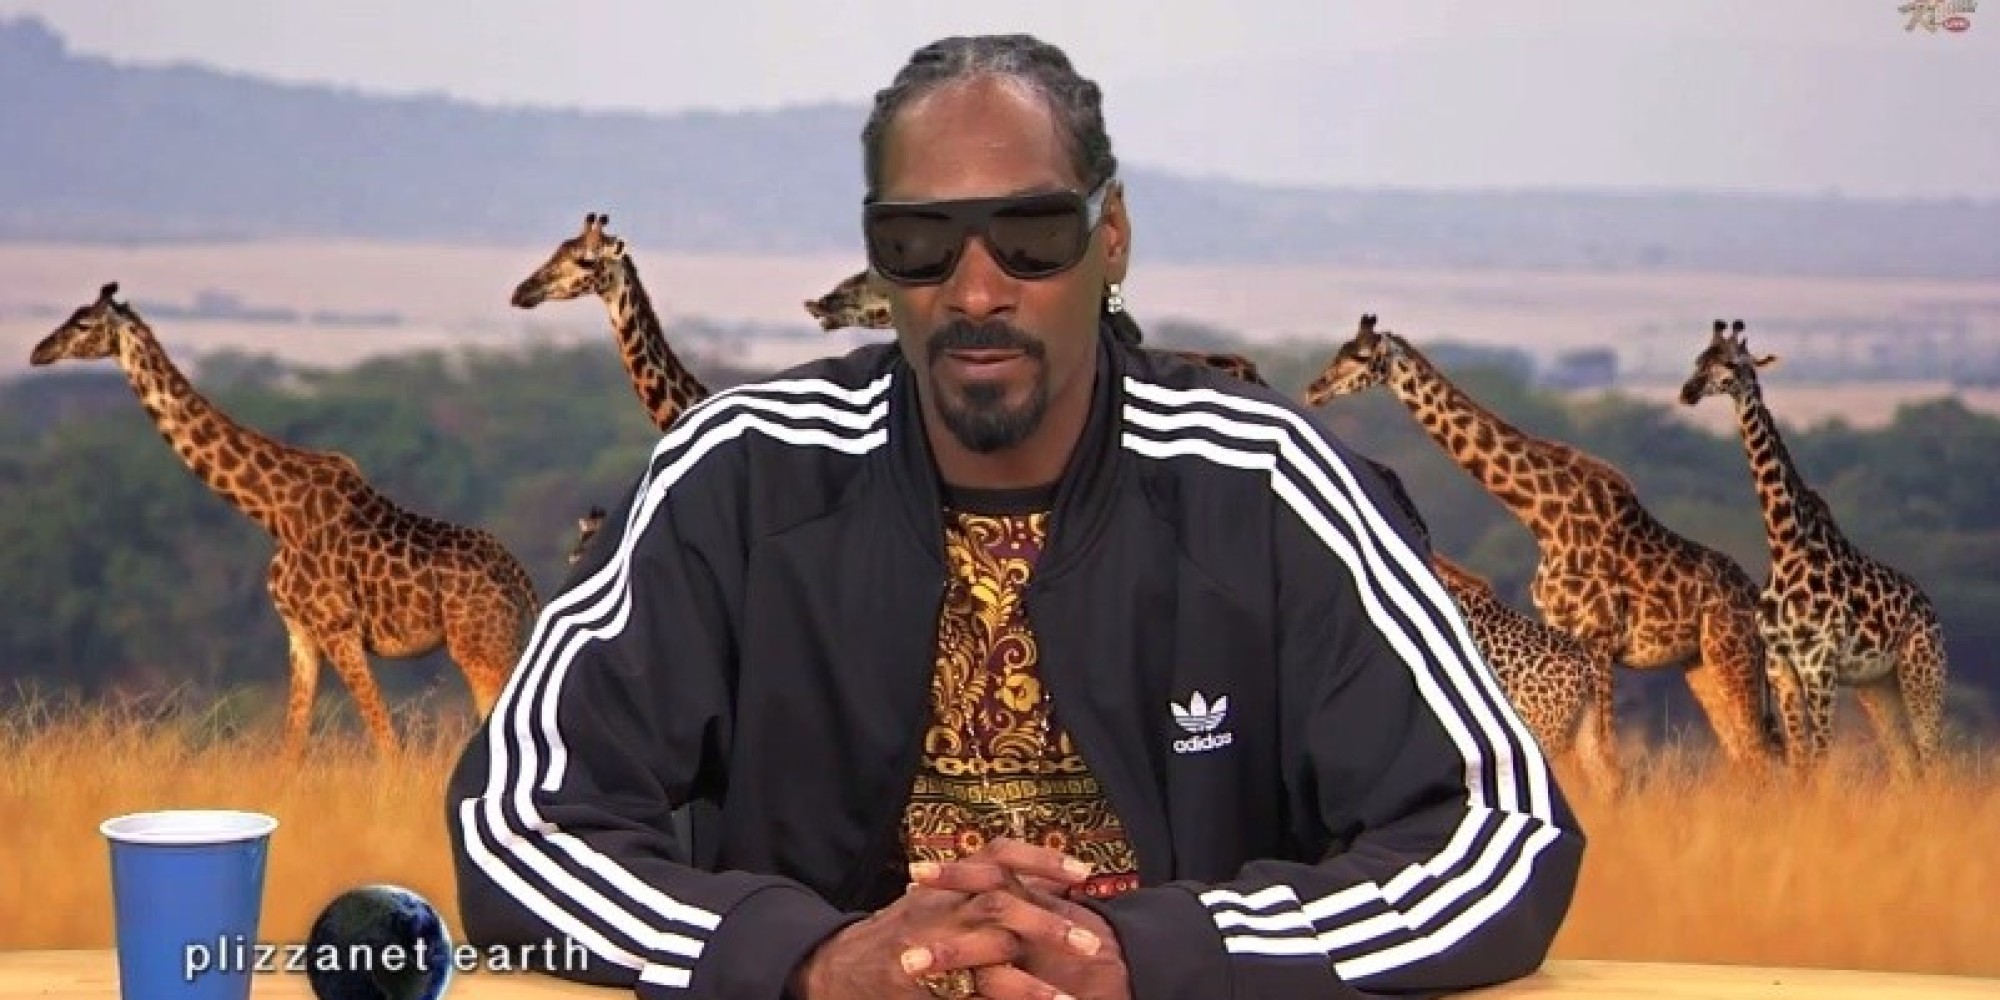 Snoop Dogg Talking About Animals In Earth' Is The Shizzle